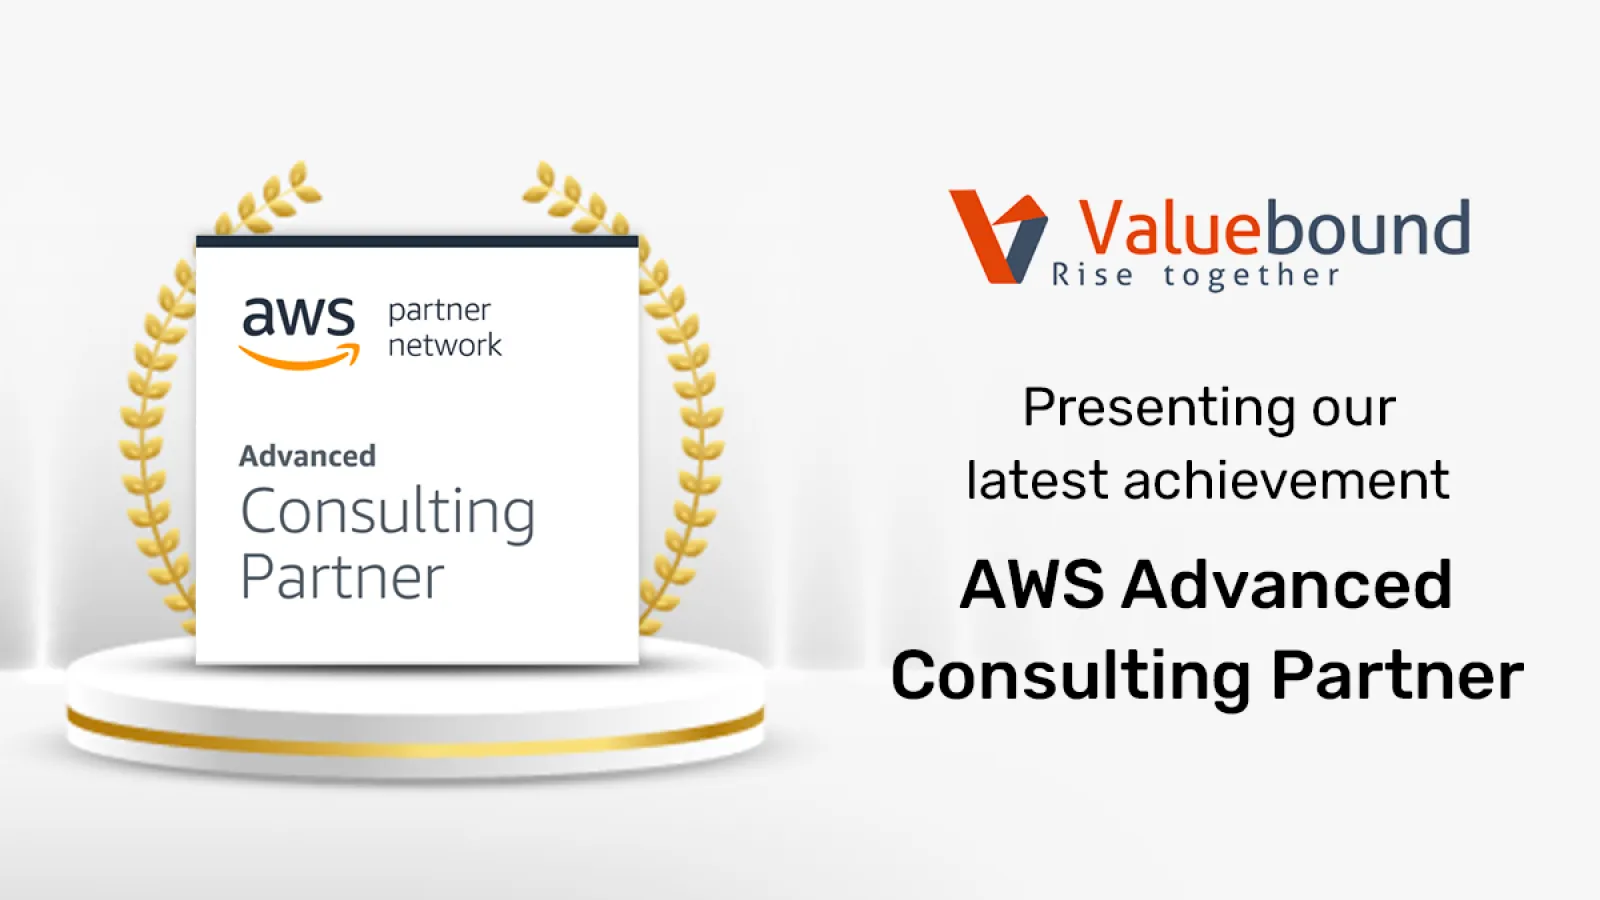 Valuebound Attains AWS Advanced Consulting Partner Status, Offering Expert Cloud Migration Services